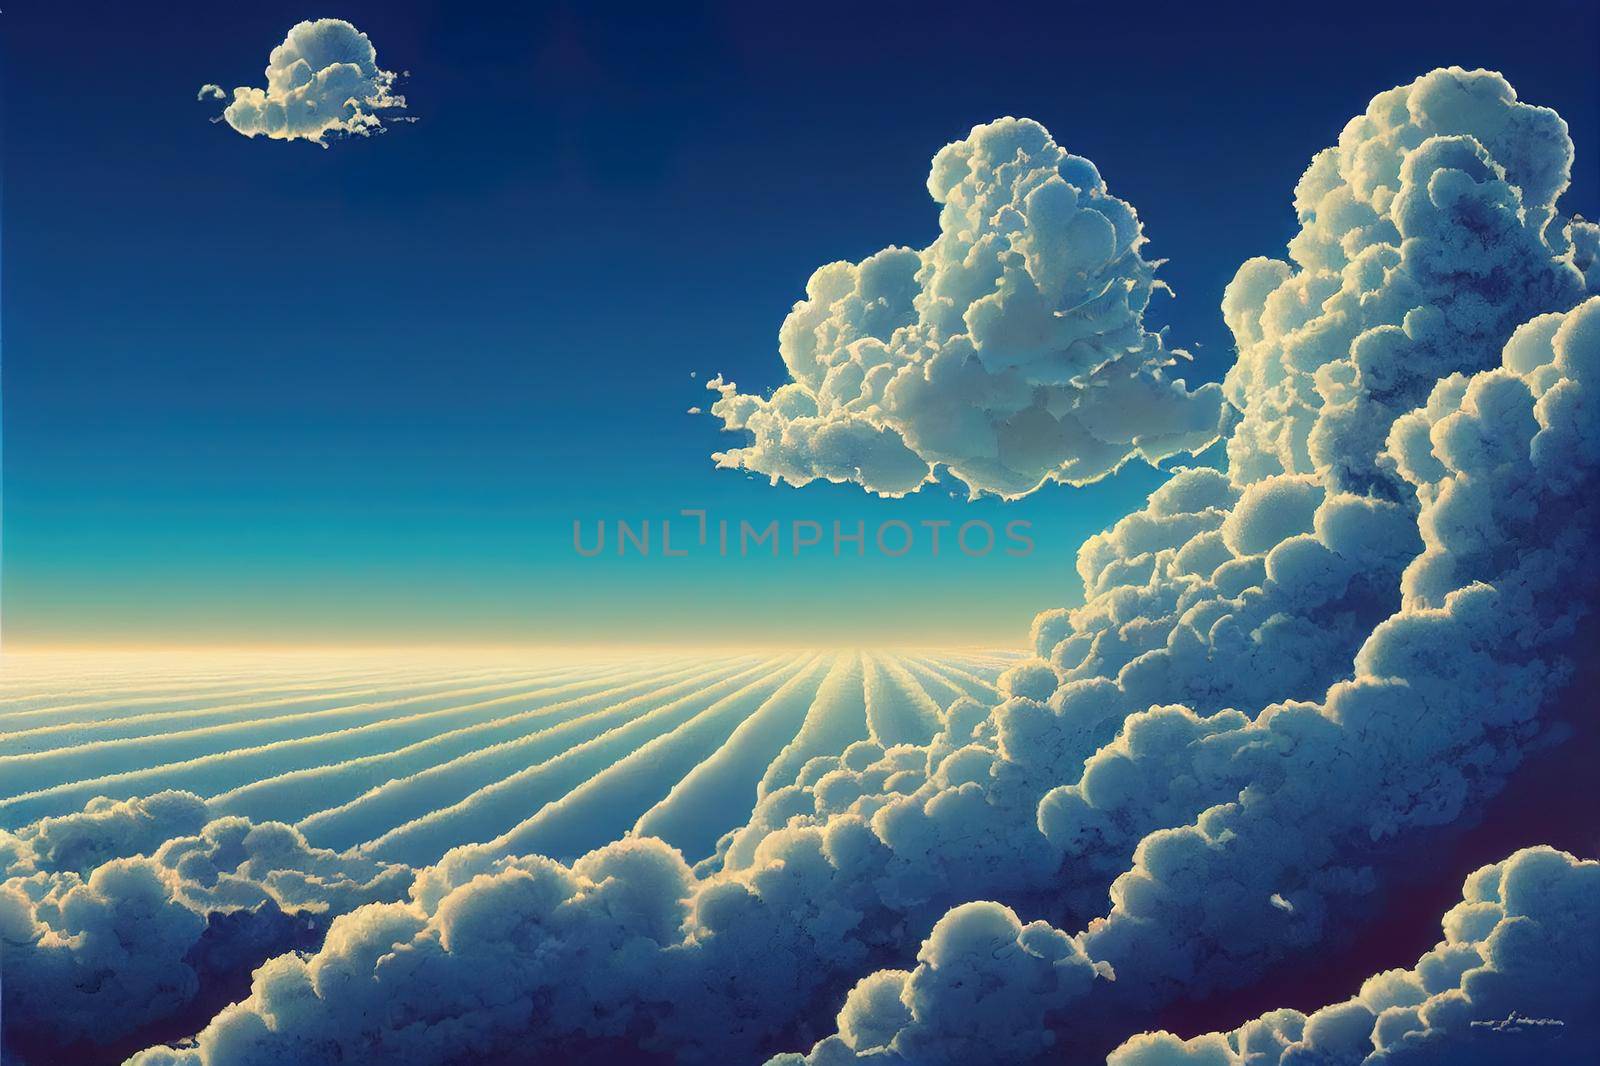 blue sky with cloud, sky background. High quality illustration